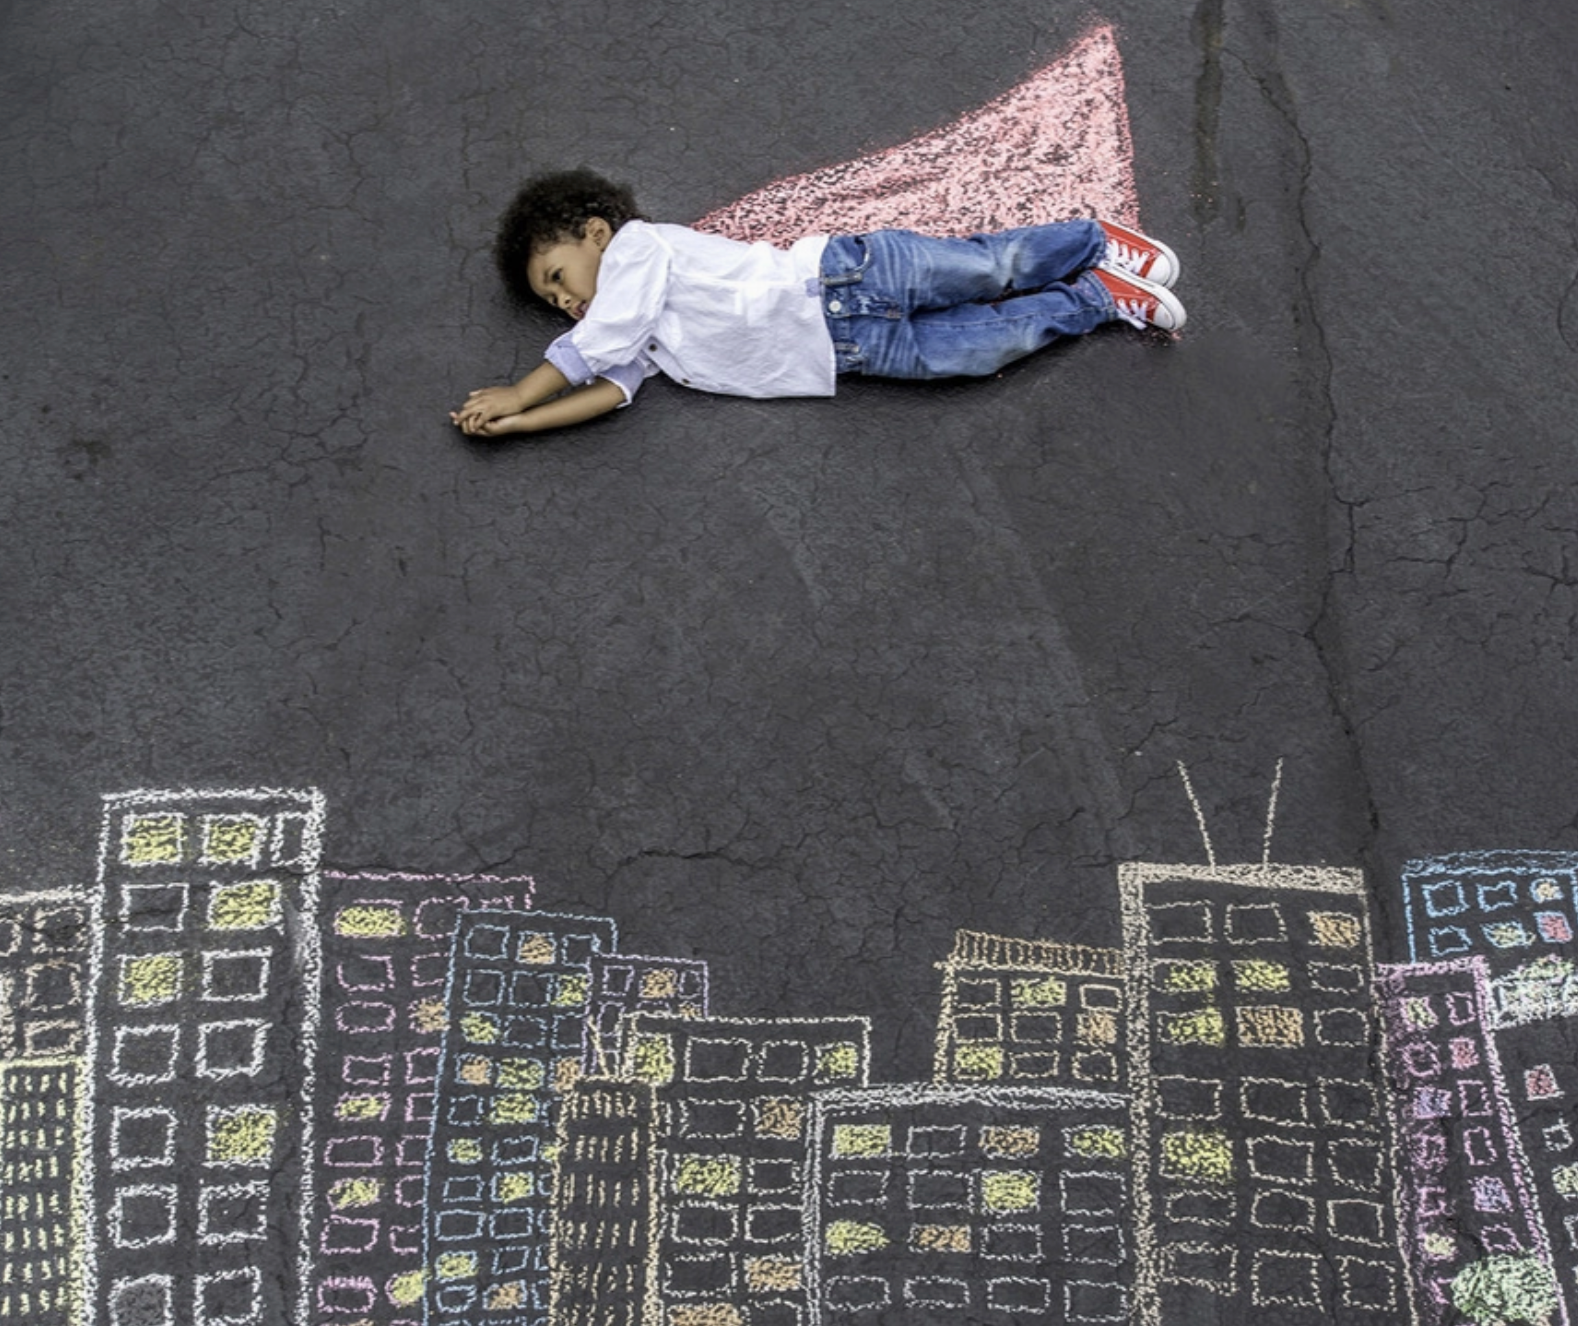 Image of young child lying on street with a chalk cape.